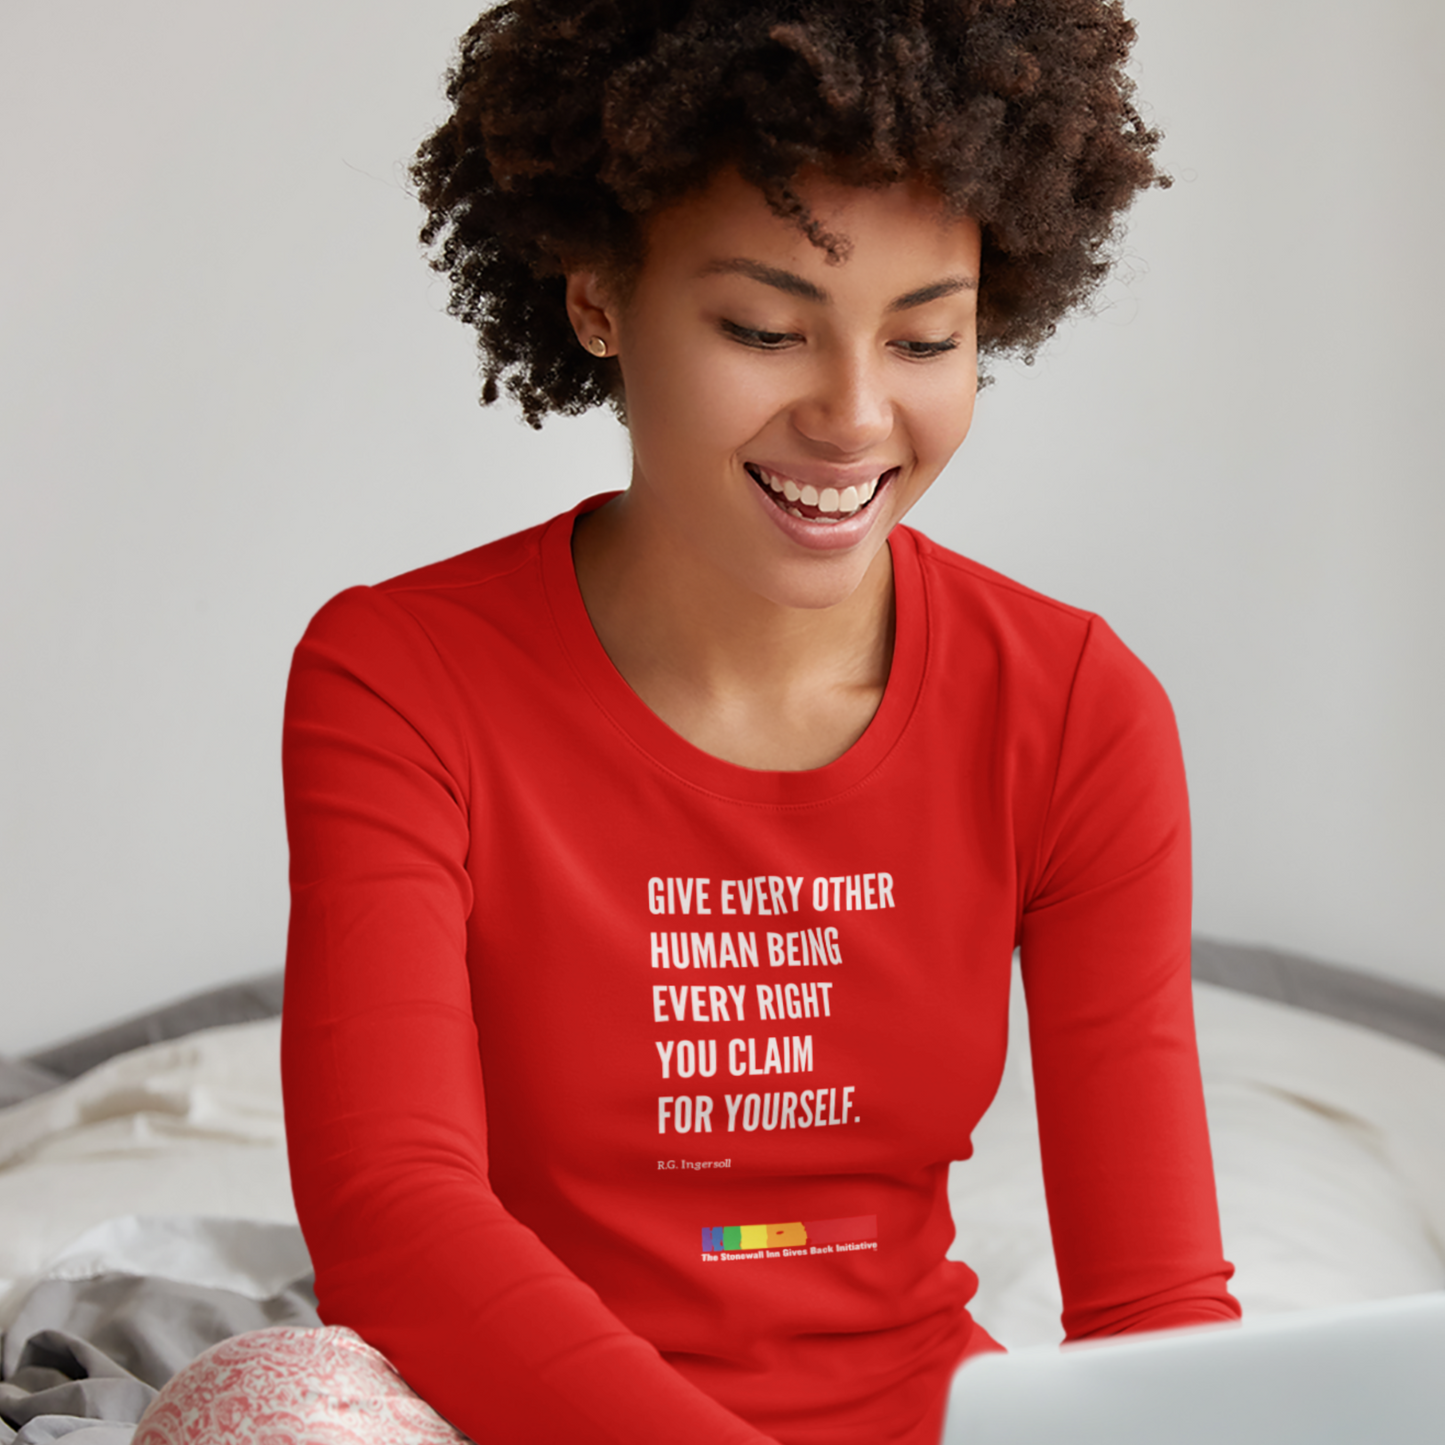 "Give Every Other Human Being Every Right You Claim For Yourself" LGBTQ+ Support long sleeve tee in red